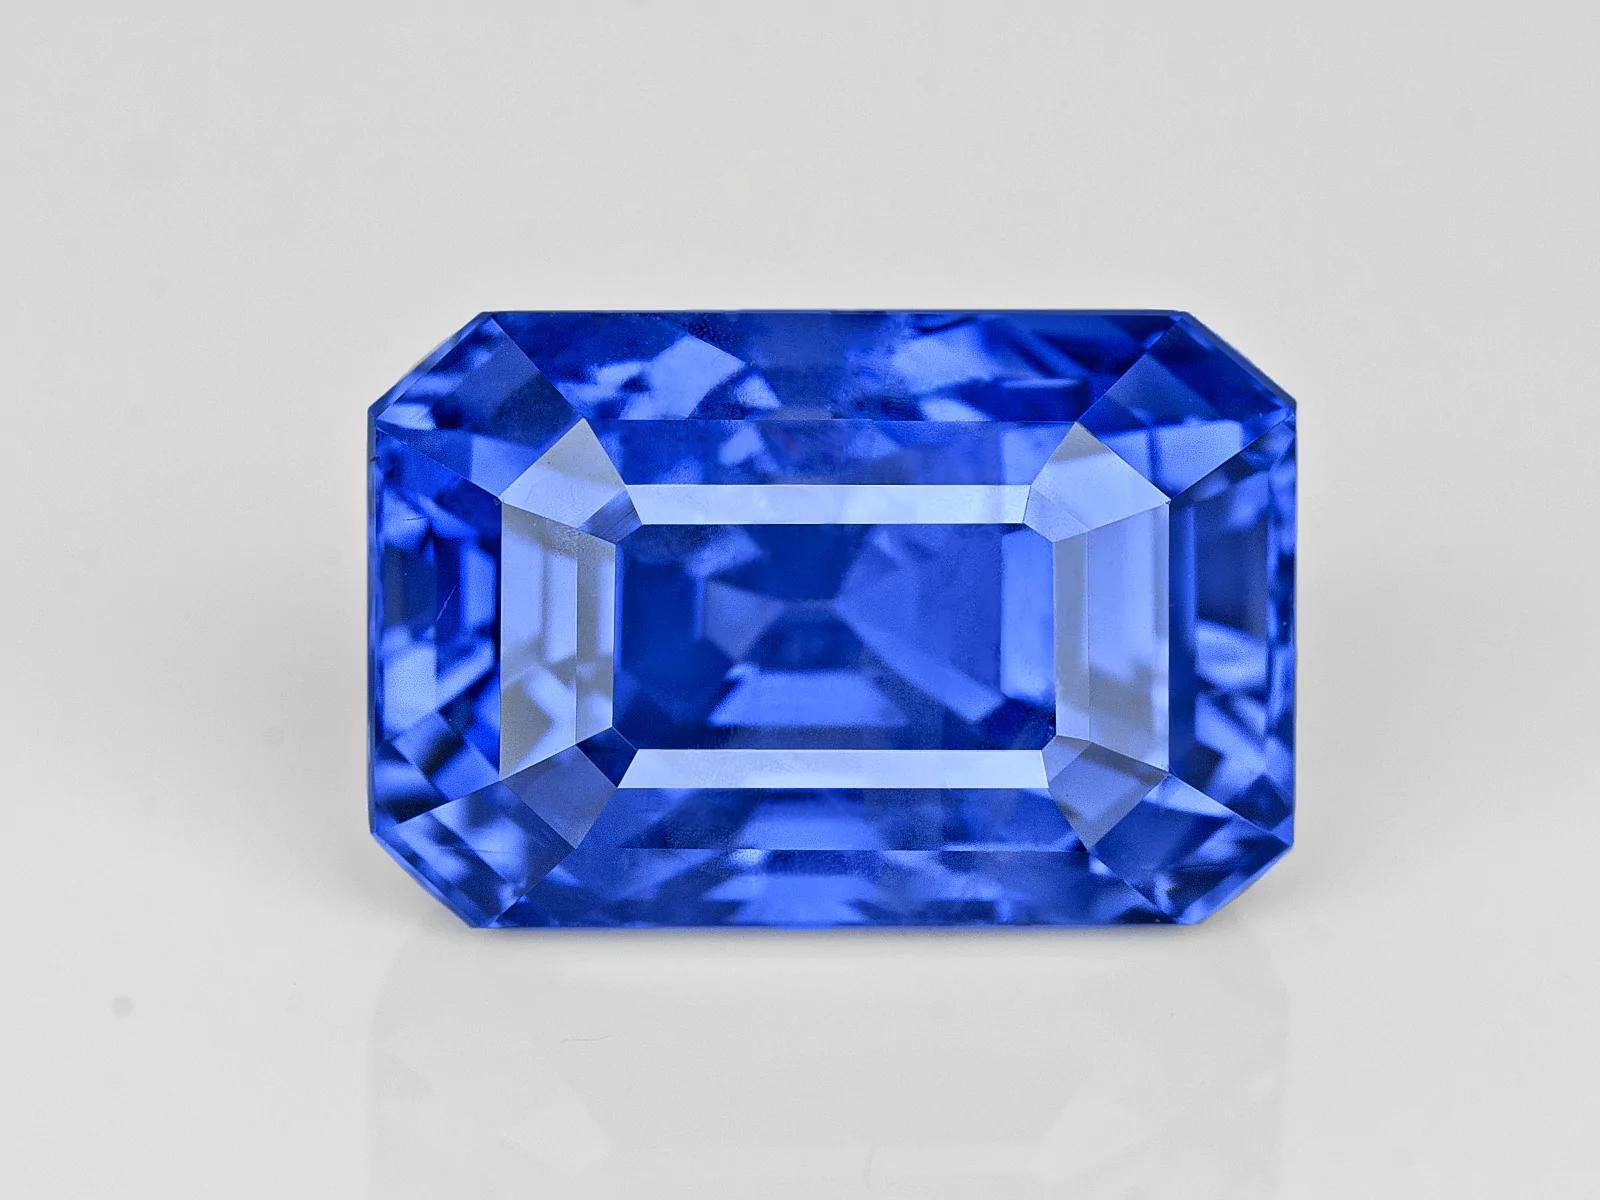 This fantastic sapphire from Sri Lanka has a weight of 9.12 carats and is certified by GRS Swisslab one of the most important laboratories in the world for the quality certification of colored stones. 
According to the GRS report, this sapphire has